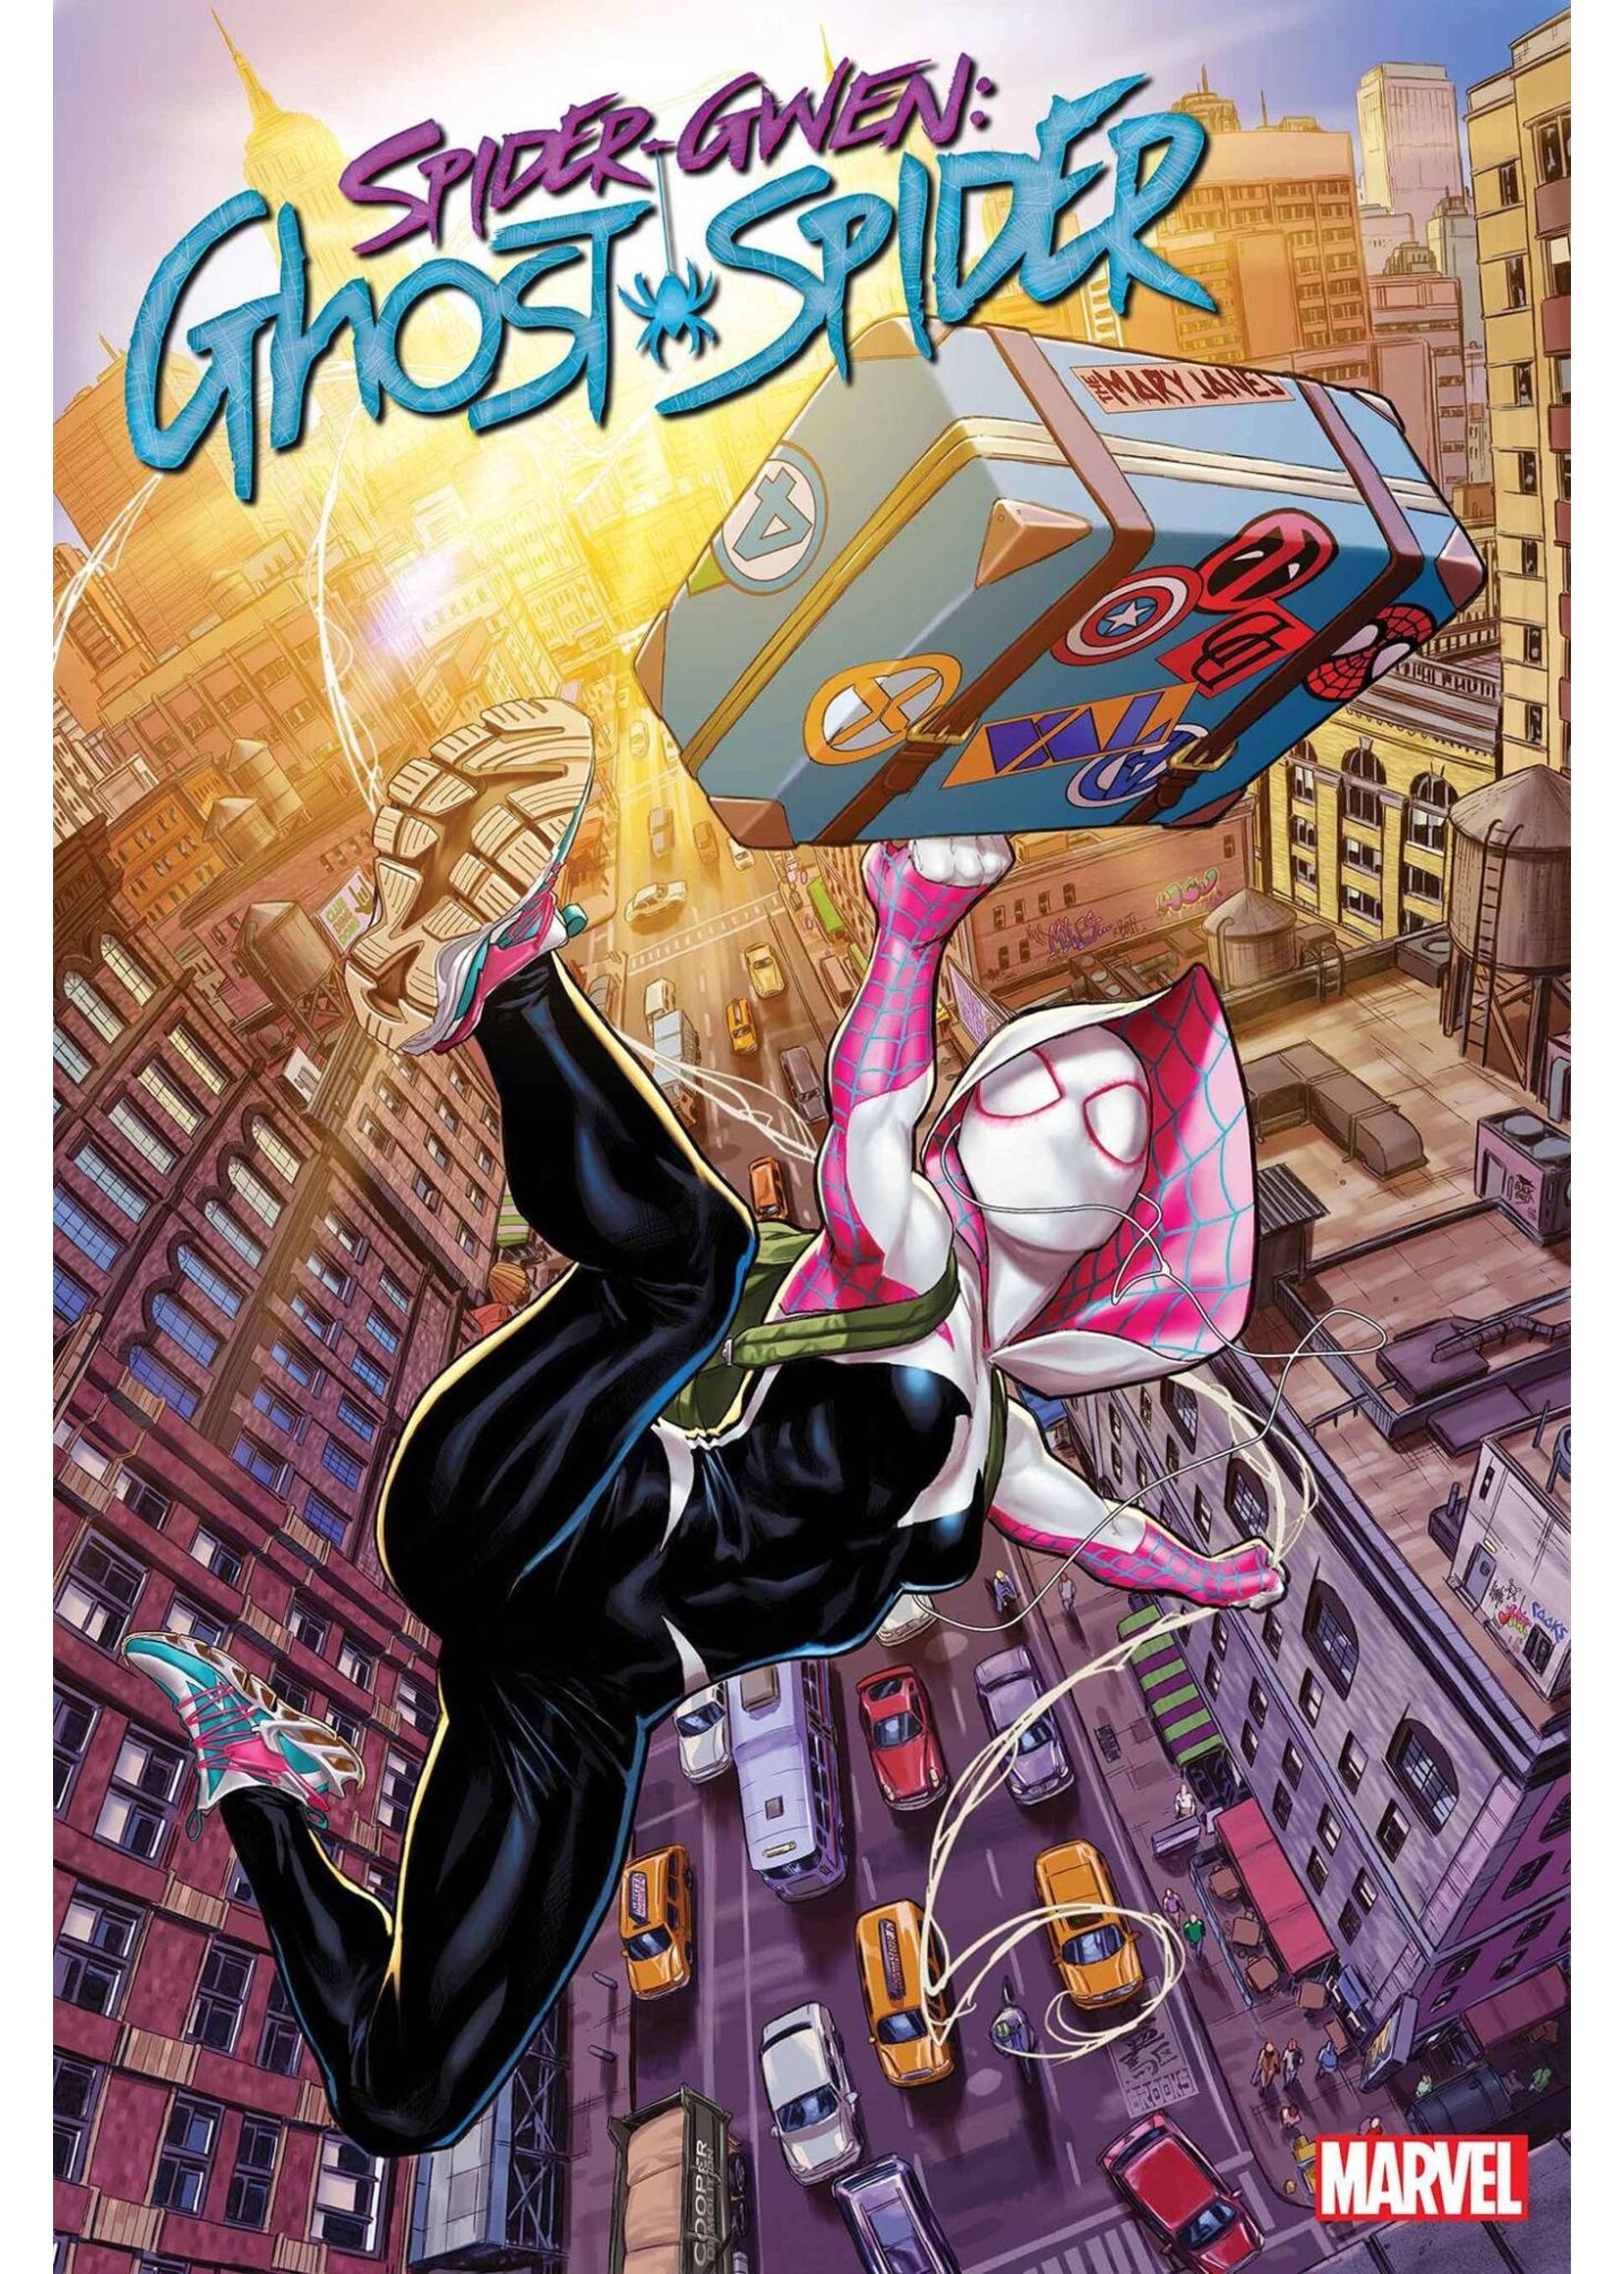 MARVEL COMICS SPIDER-GWEN THE GHOST-SPIDER #1 POSTER